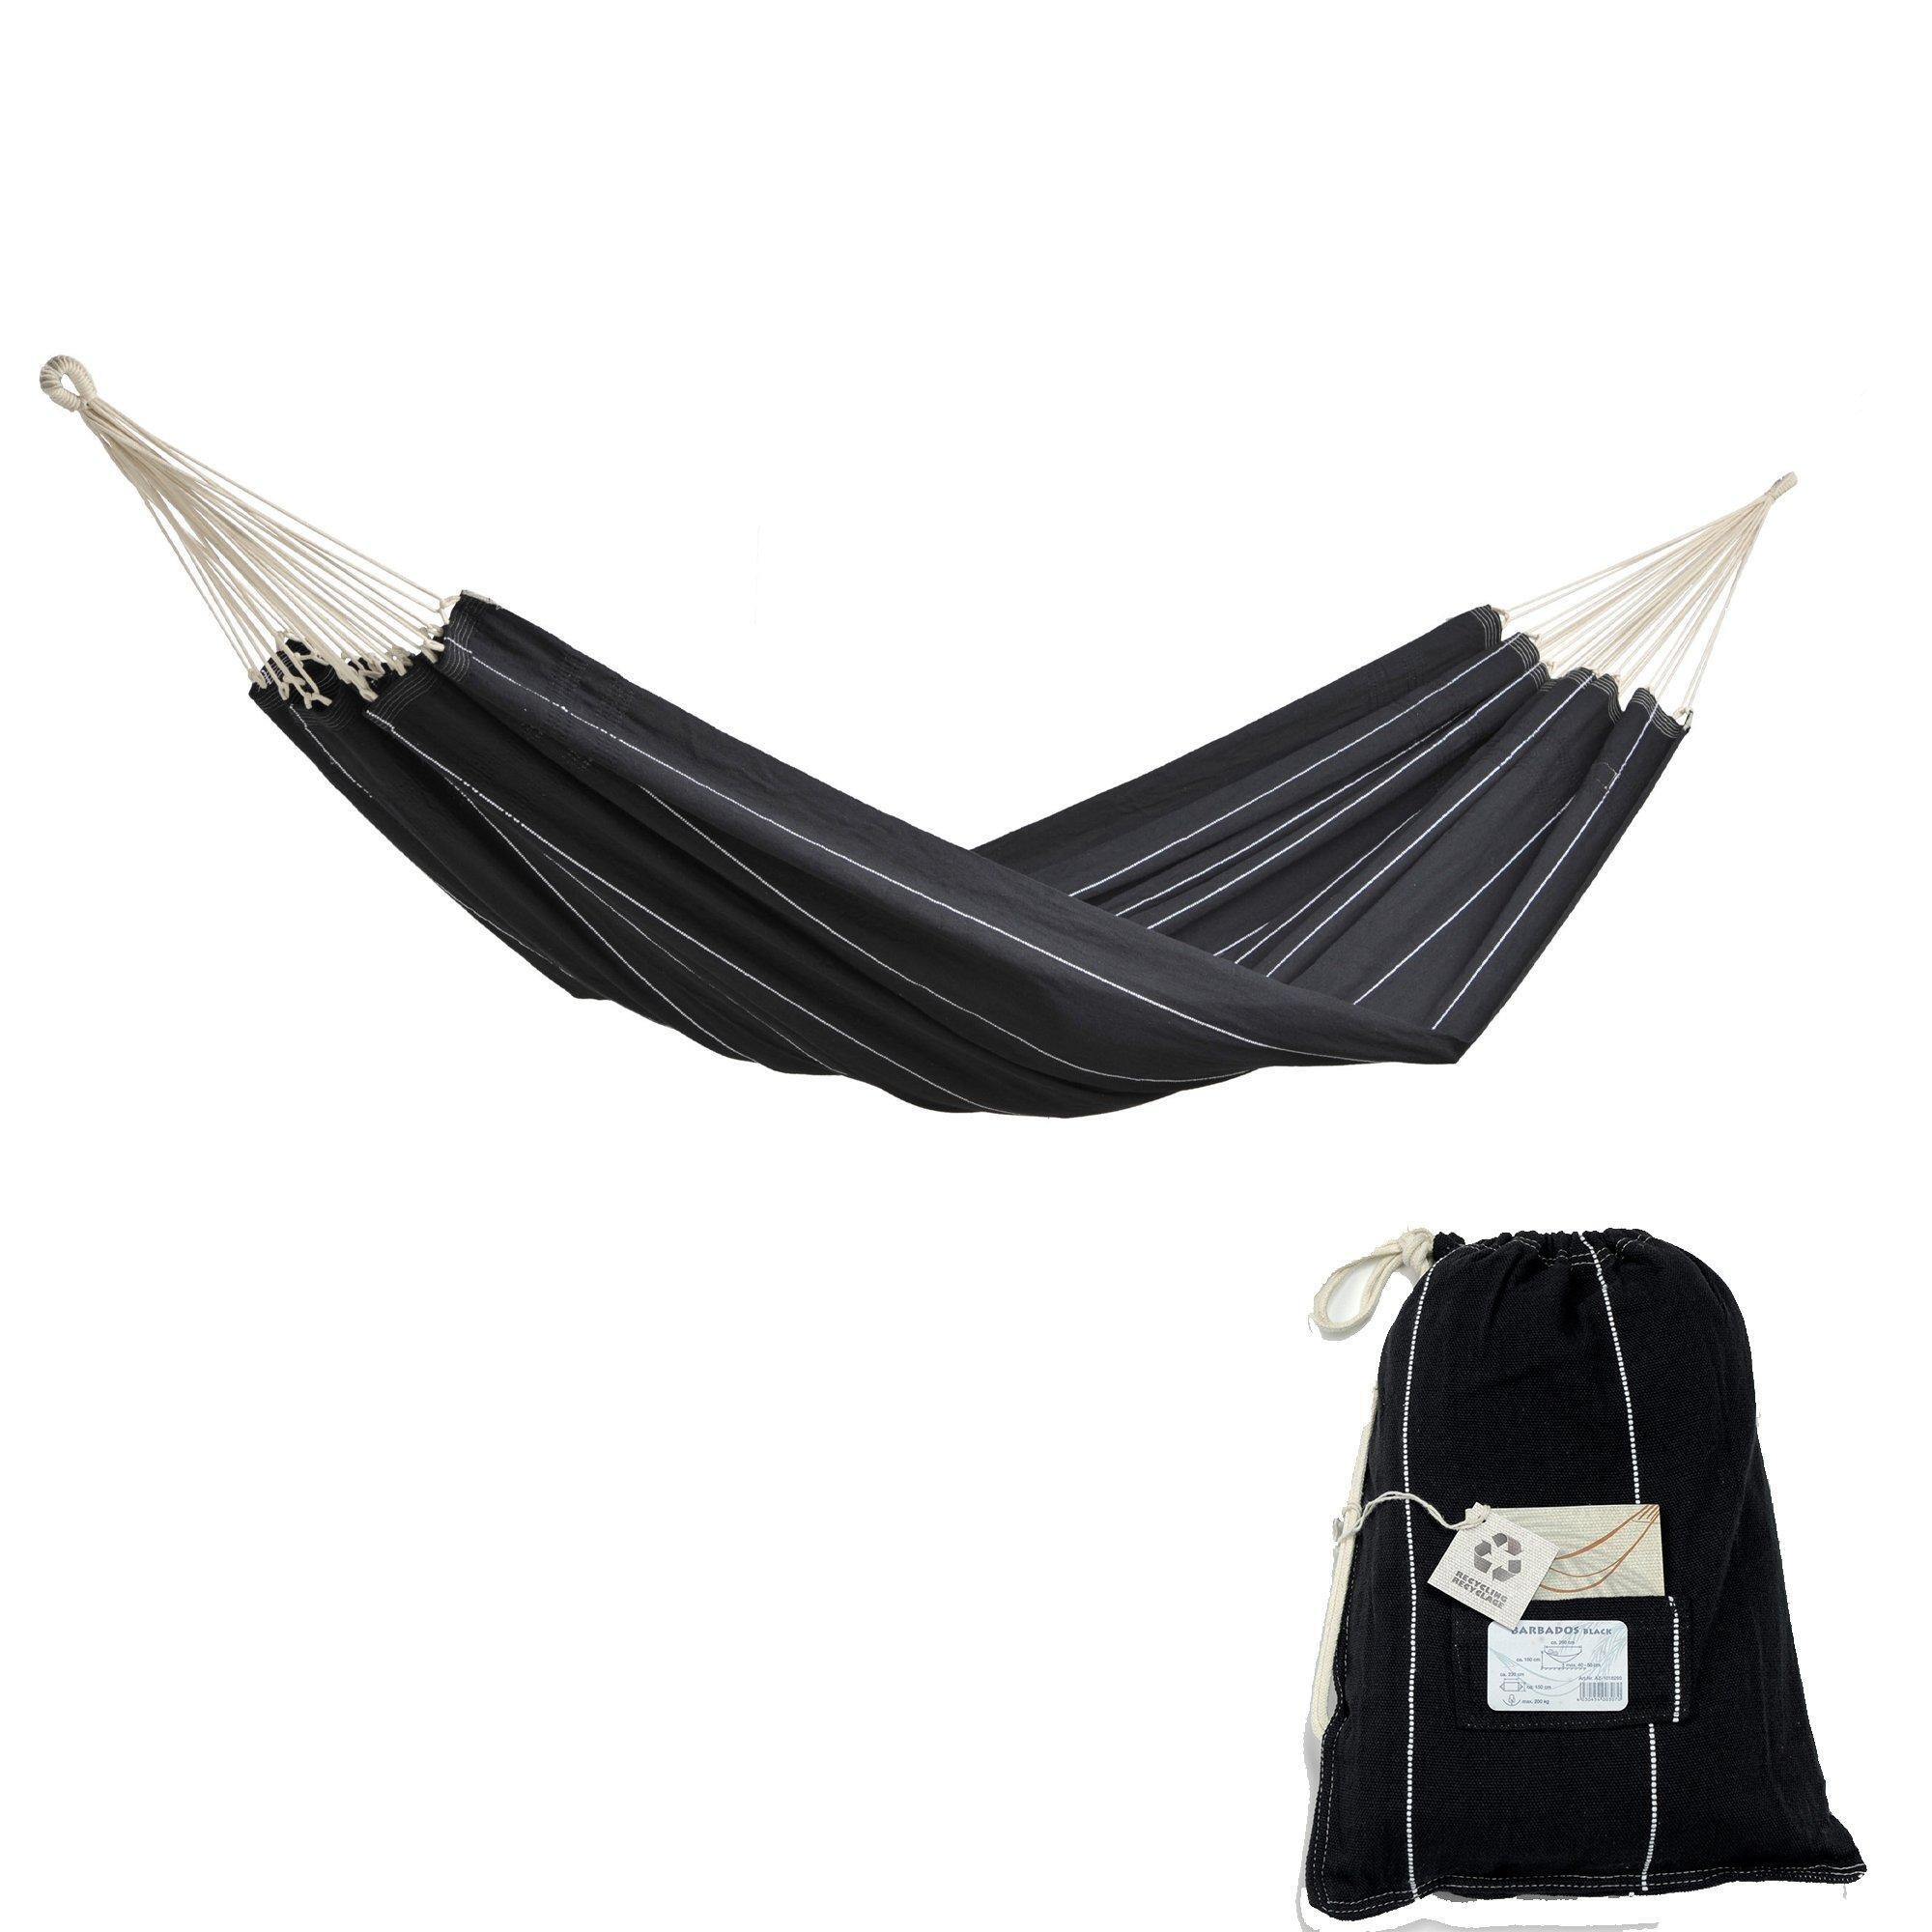 Amazonas Barbados Cotton Double 2 Seat/Person Sized Classic Garden Hammock With Bag -  Black - image 1